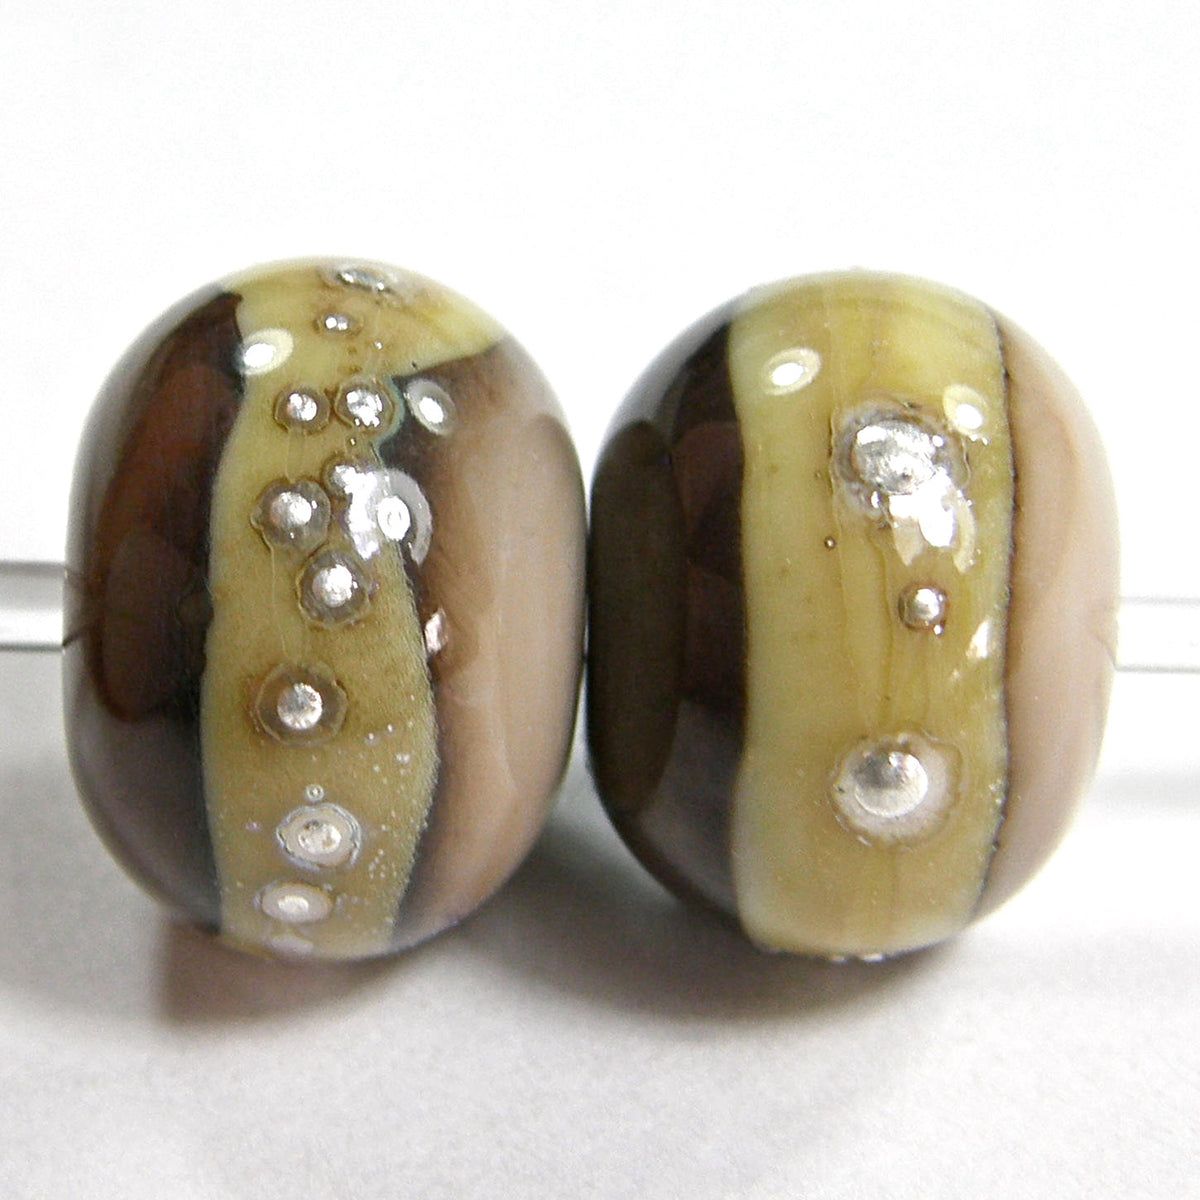 Two tone mudslide brown handmade lampwork beads with a silvered ivory band wrapped in fine silver with a shiny glass bead finish bit.ly/TwoToneMudslid… via @Covergirlbeads #ejwtt #LampworkBeads #ShopSmall